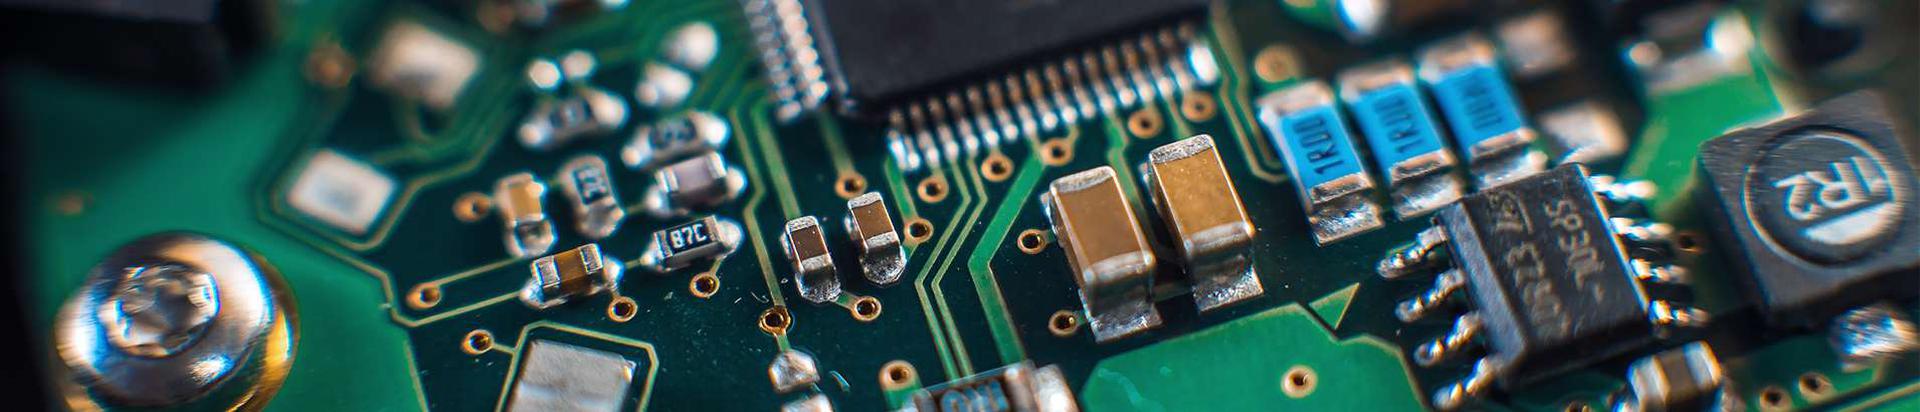 Electronics Industry, Mechanical engineering installation works, Electronic equipment and components